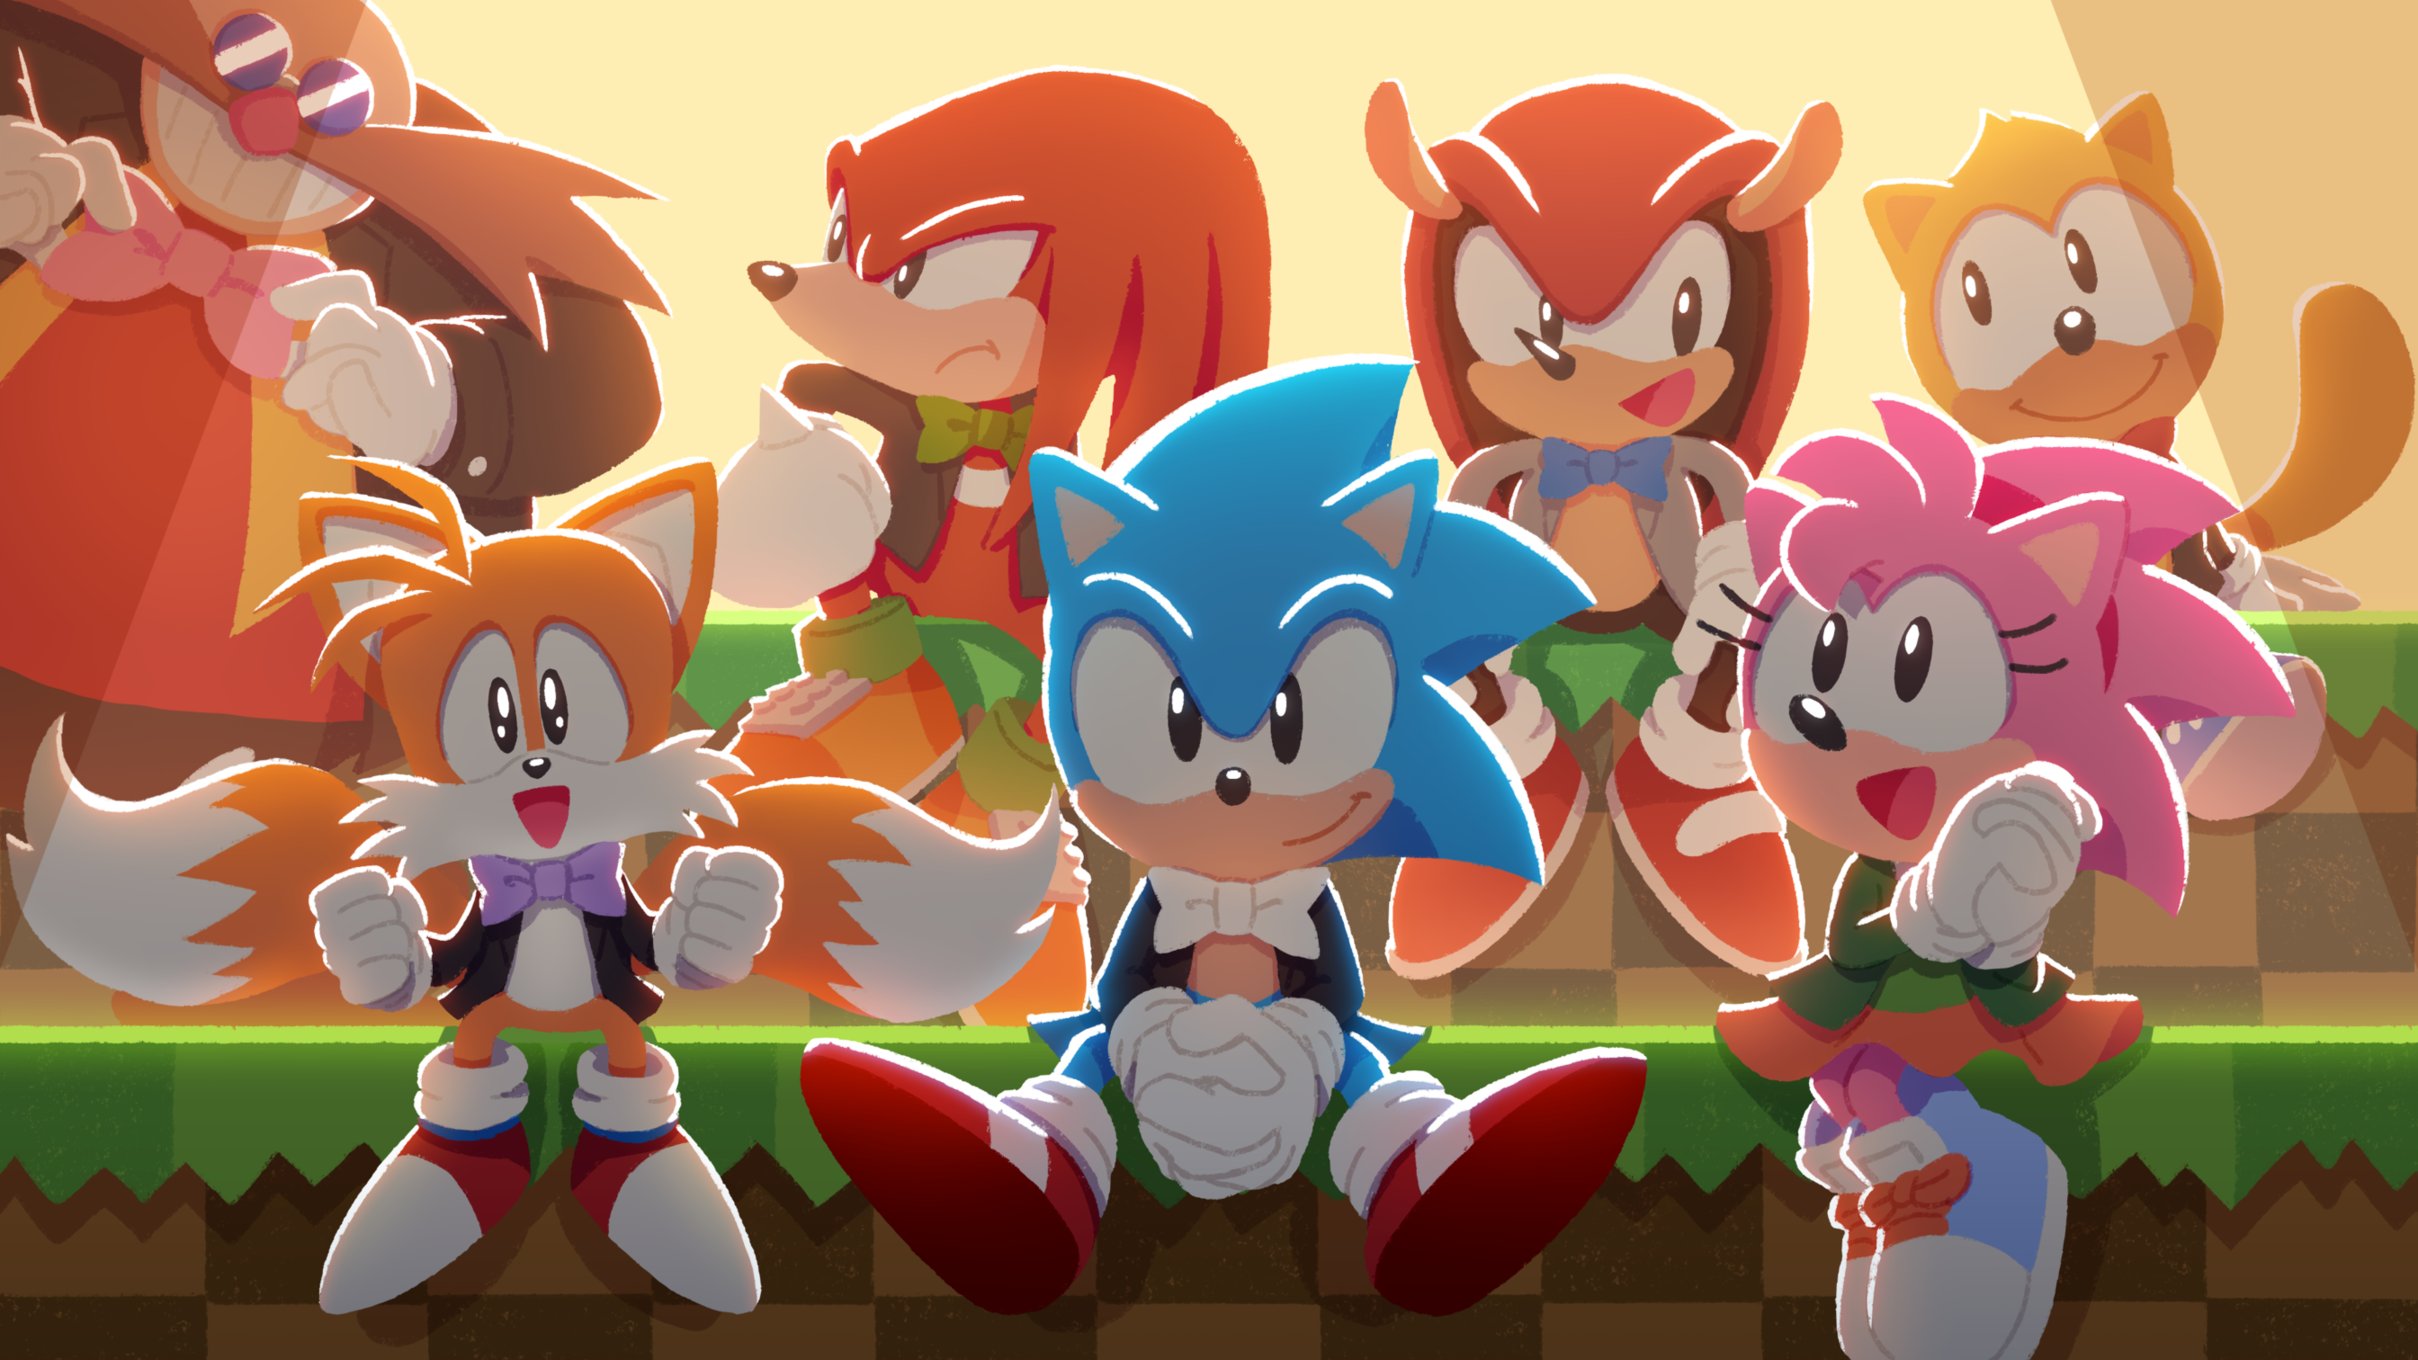 General 2418x1360 Sonic Yui Karasuno Dr. Robotnik Tails (character) Amy Rose Mighty Knuckles Sega video game art comic art PC gaming concerts concert hall Sonic the Hedgehog Ray (The Promised Neverland) Anthro retro console artwork tail video games